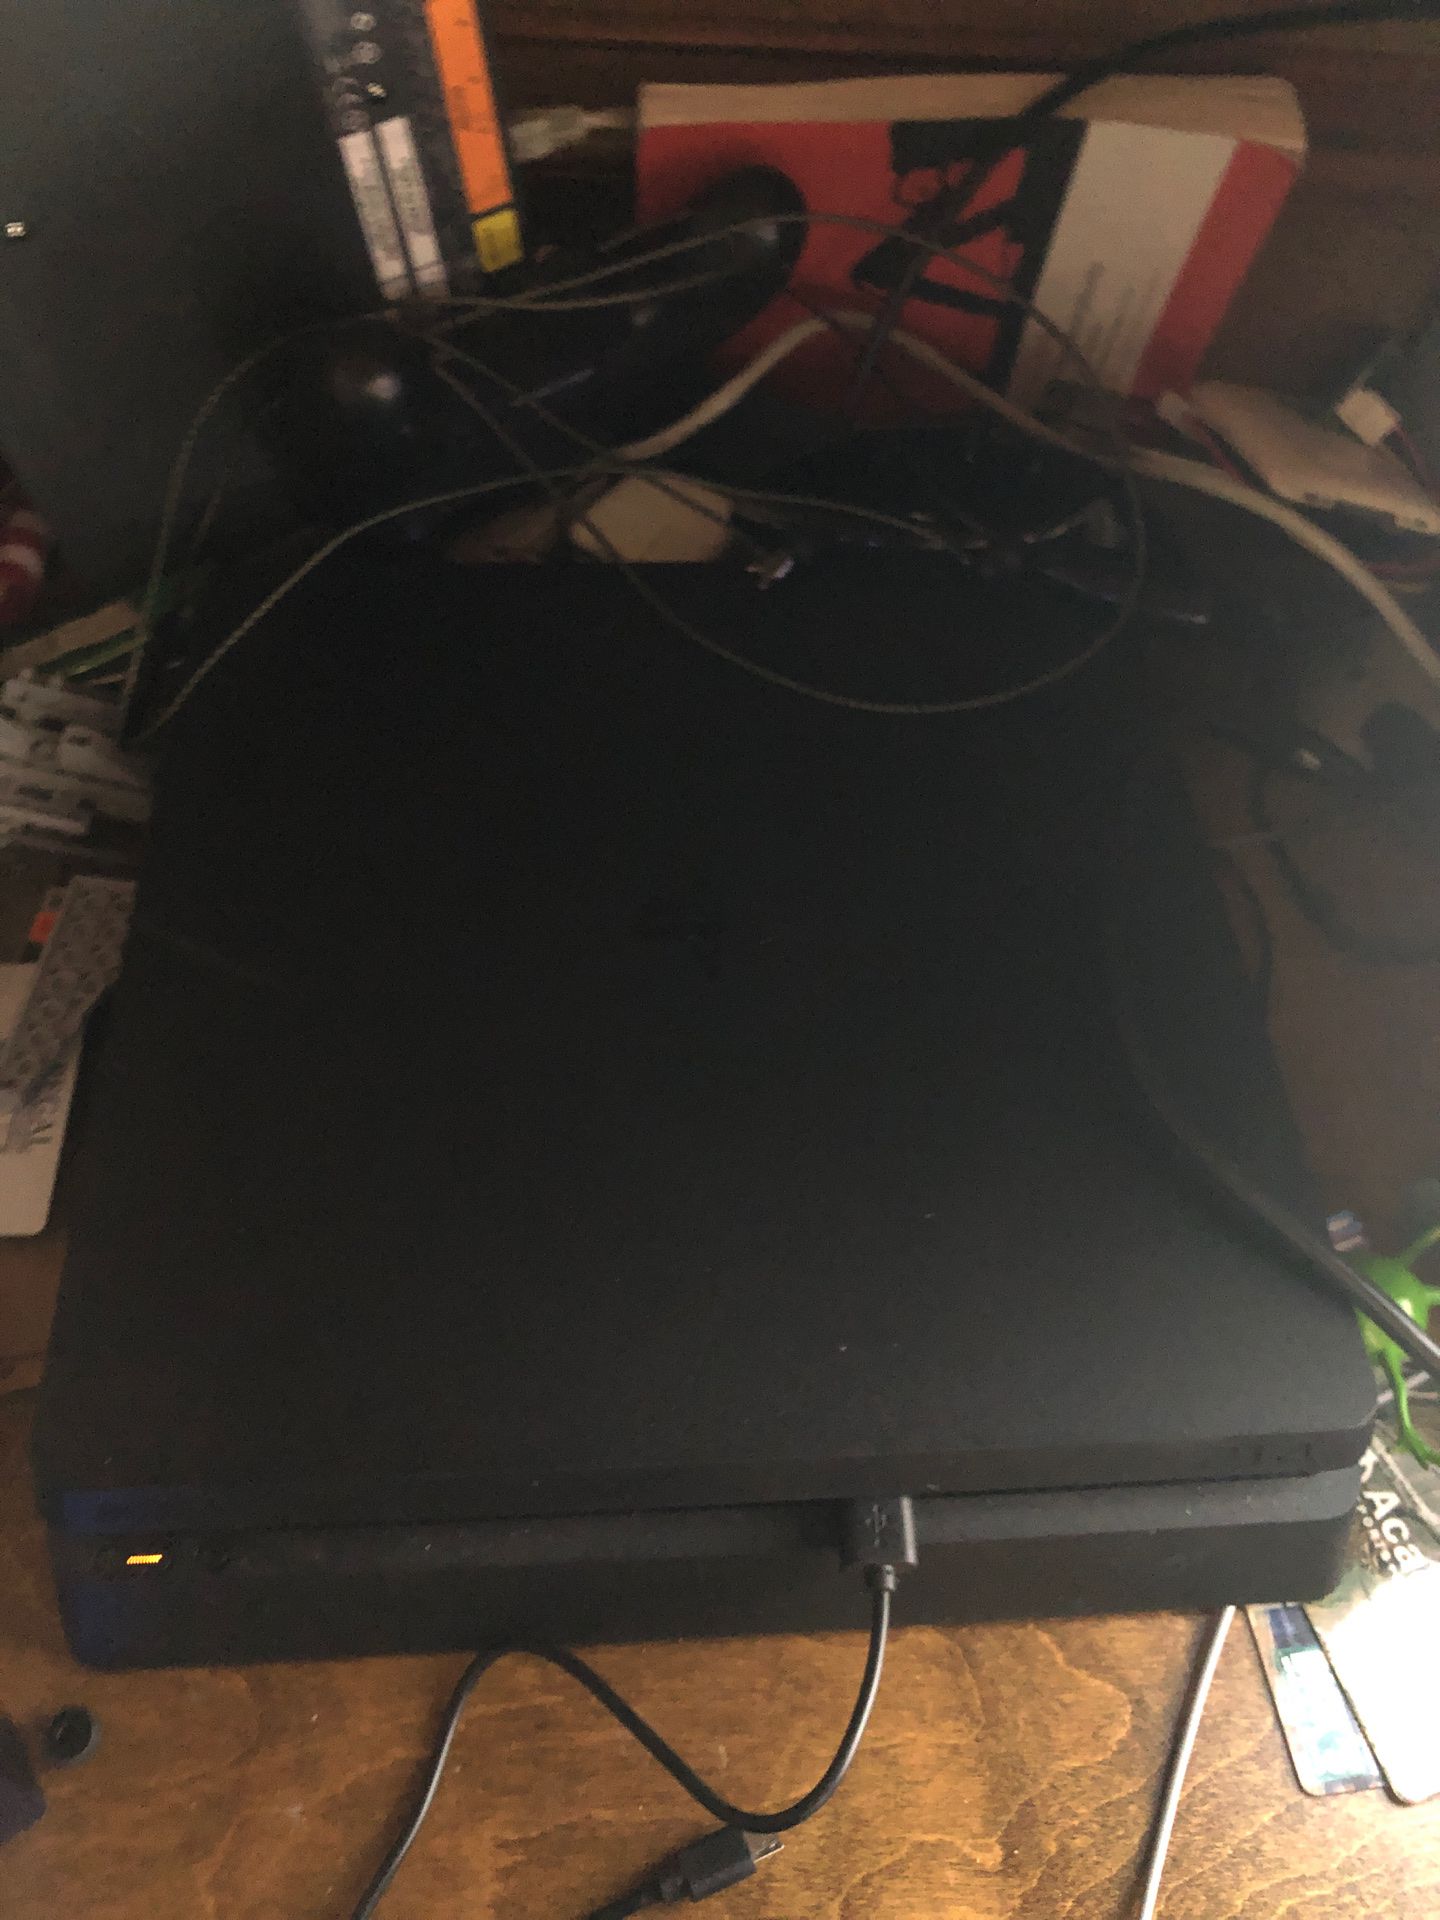 PlayStation 4 Slim with Games 1 tb